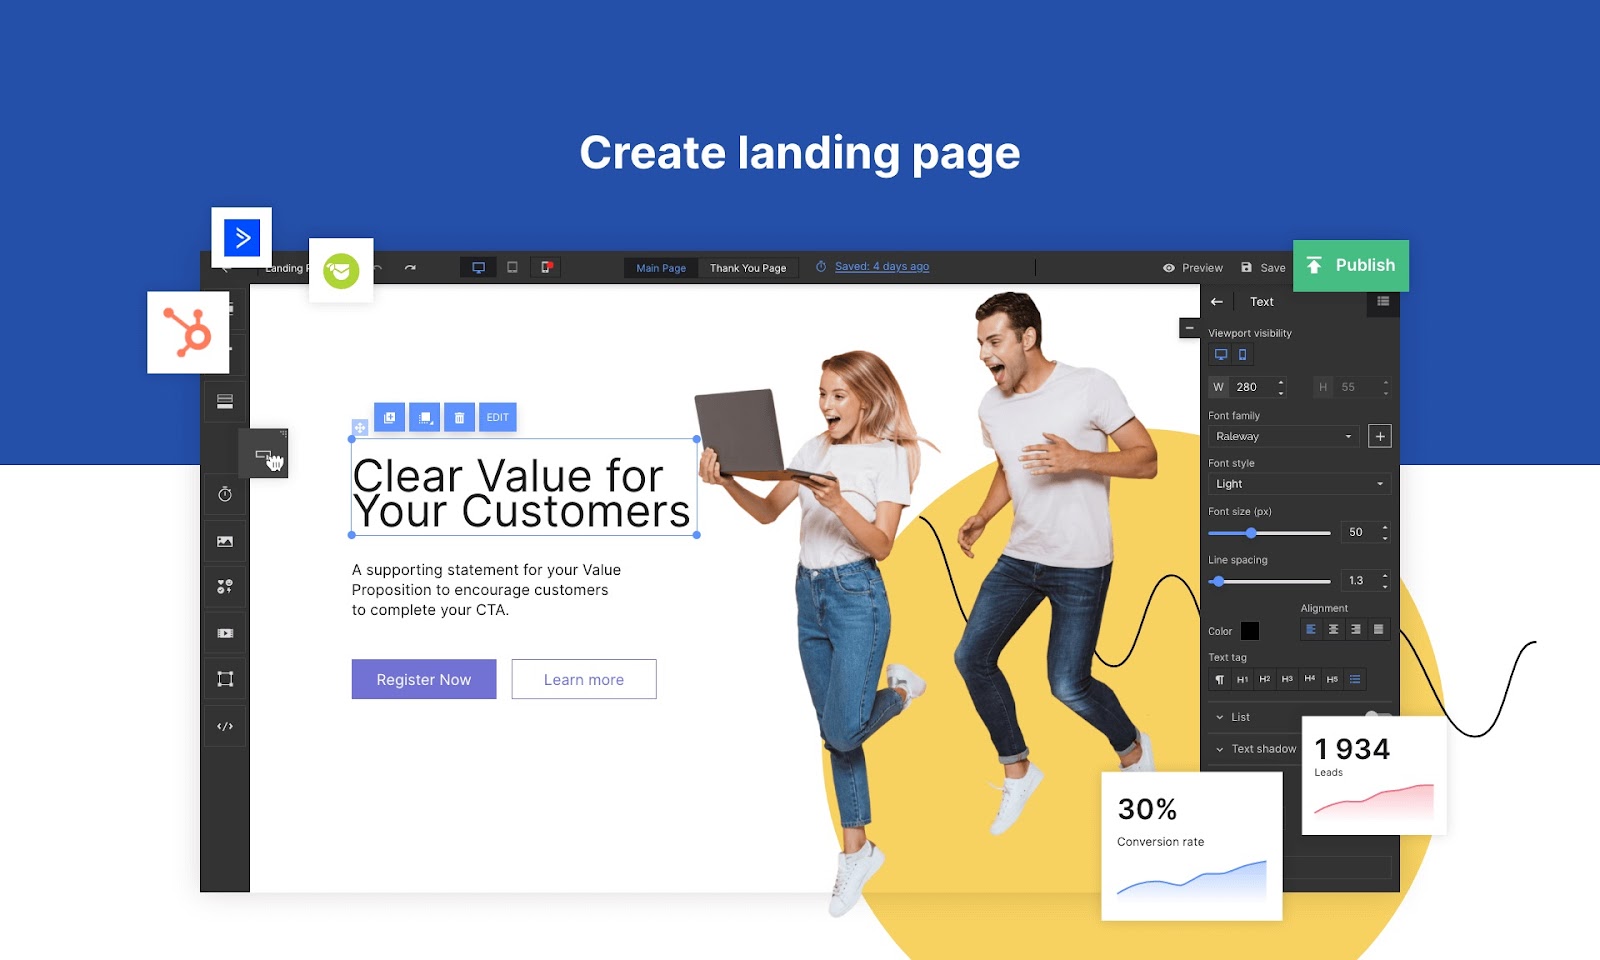 Semrush Landing Page Builder hero image showing the tool interface, icons of integrations, and results that can be achieved